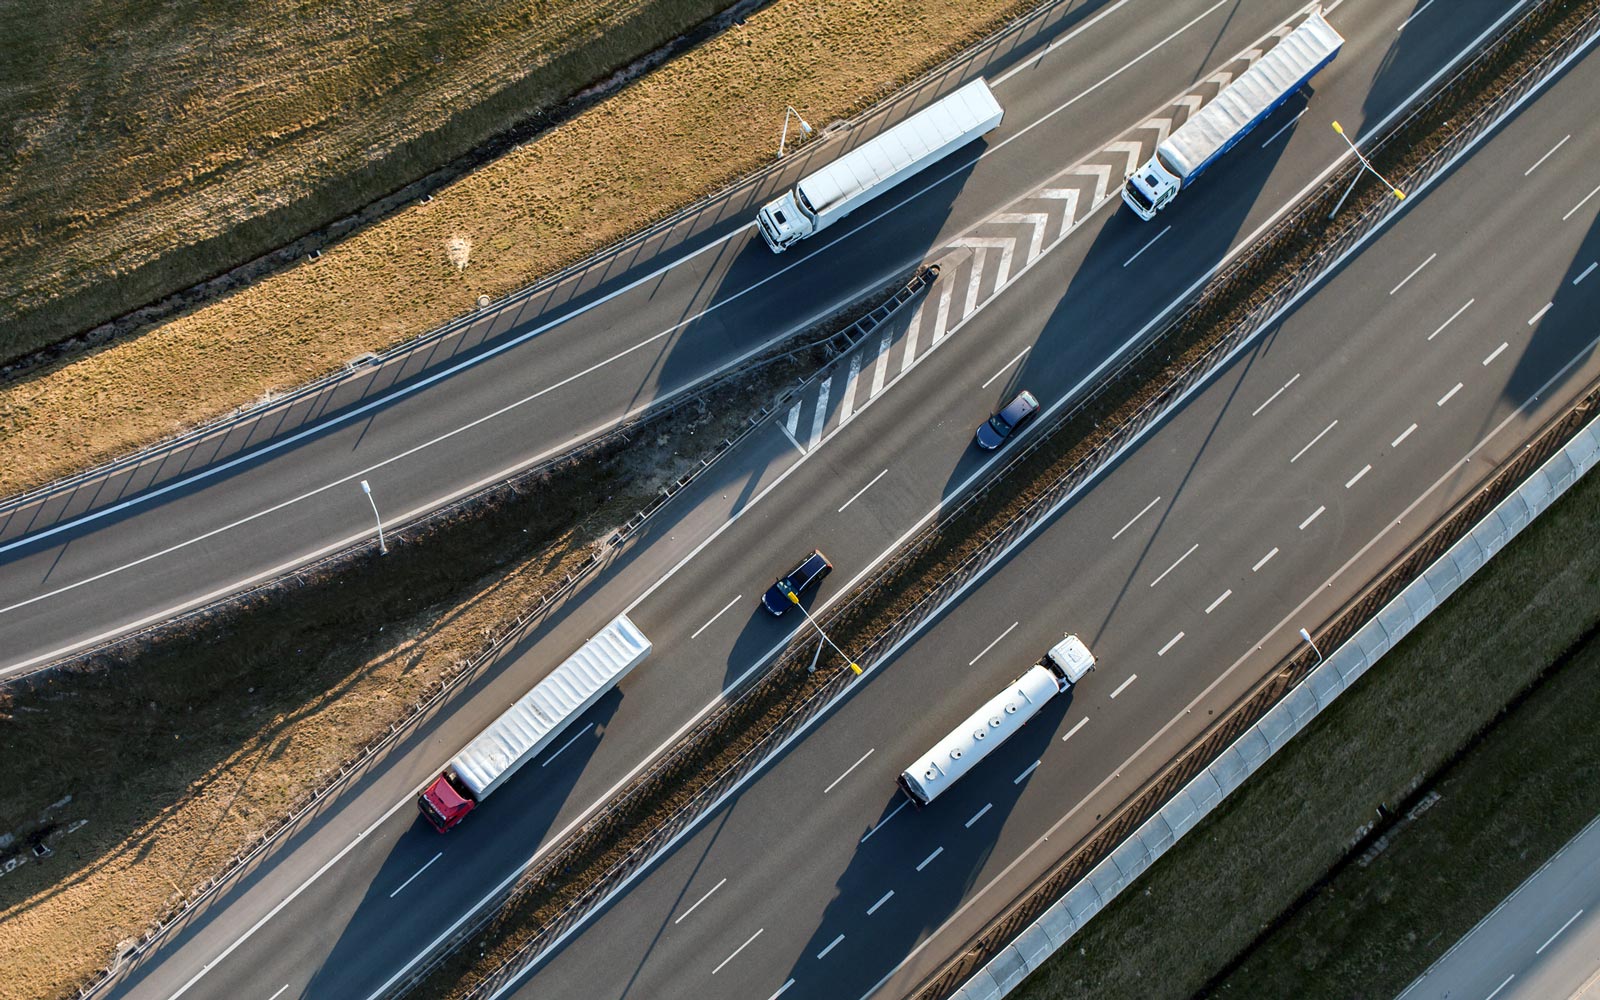 Aerial view of four freight trucks on a highway and off-ramp